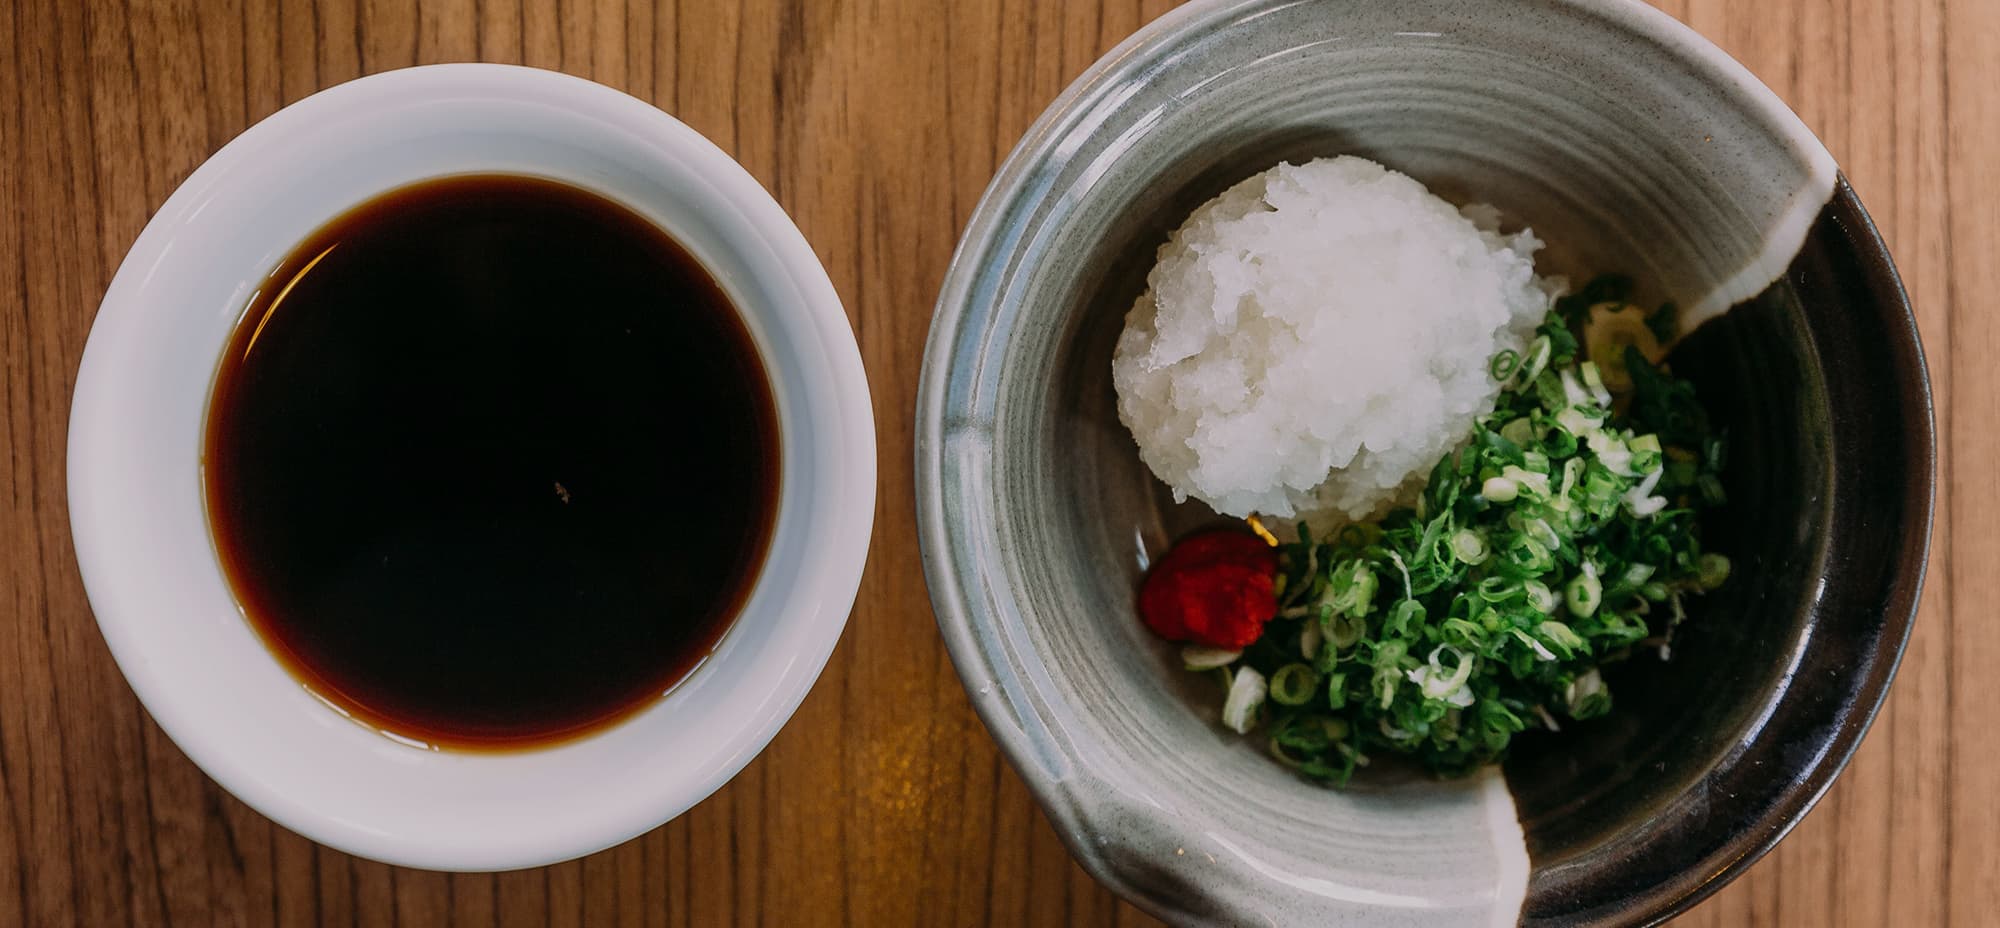 Image of a sauce in a bowl next to a serving of boiled rice